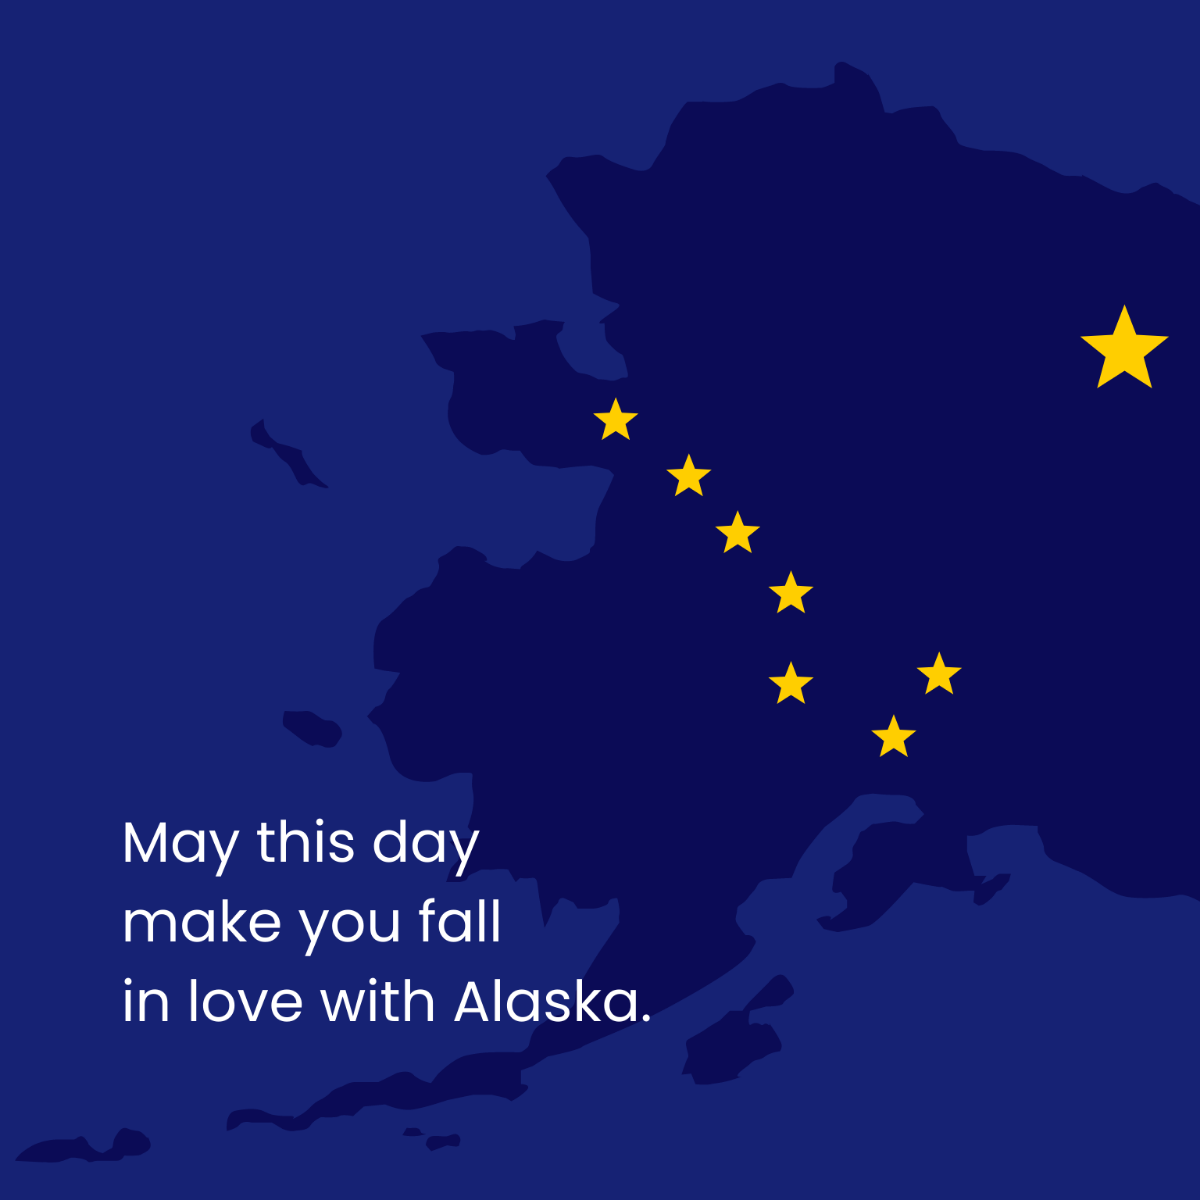 Alaska Day Wishes Vector Template